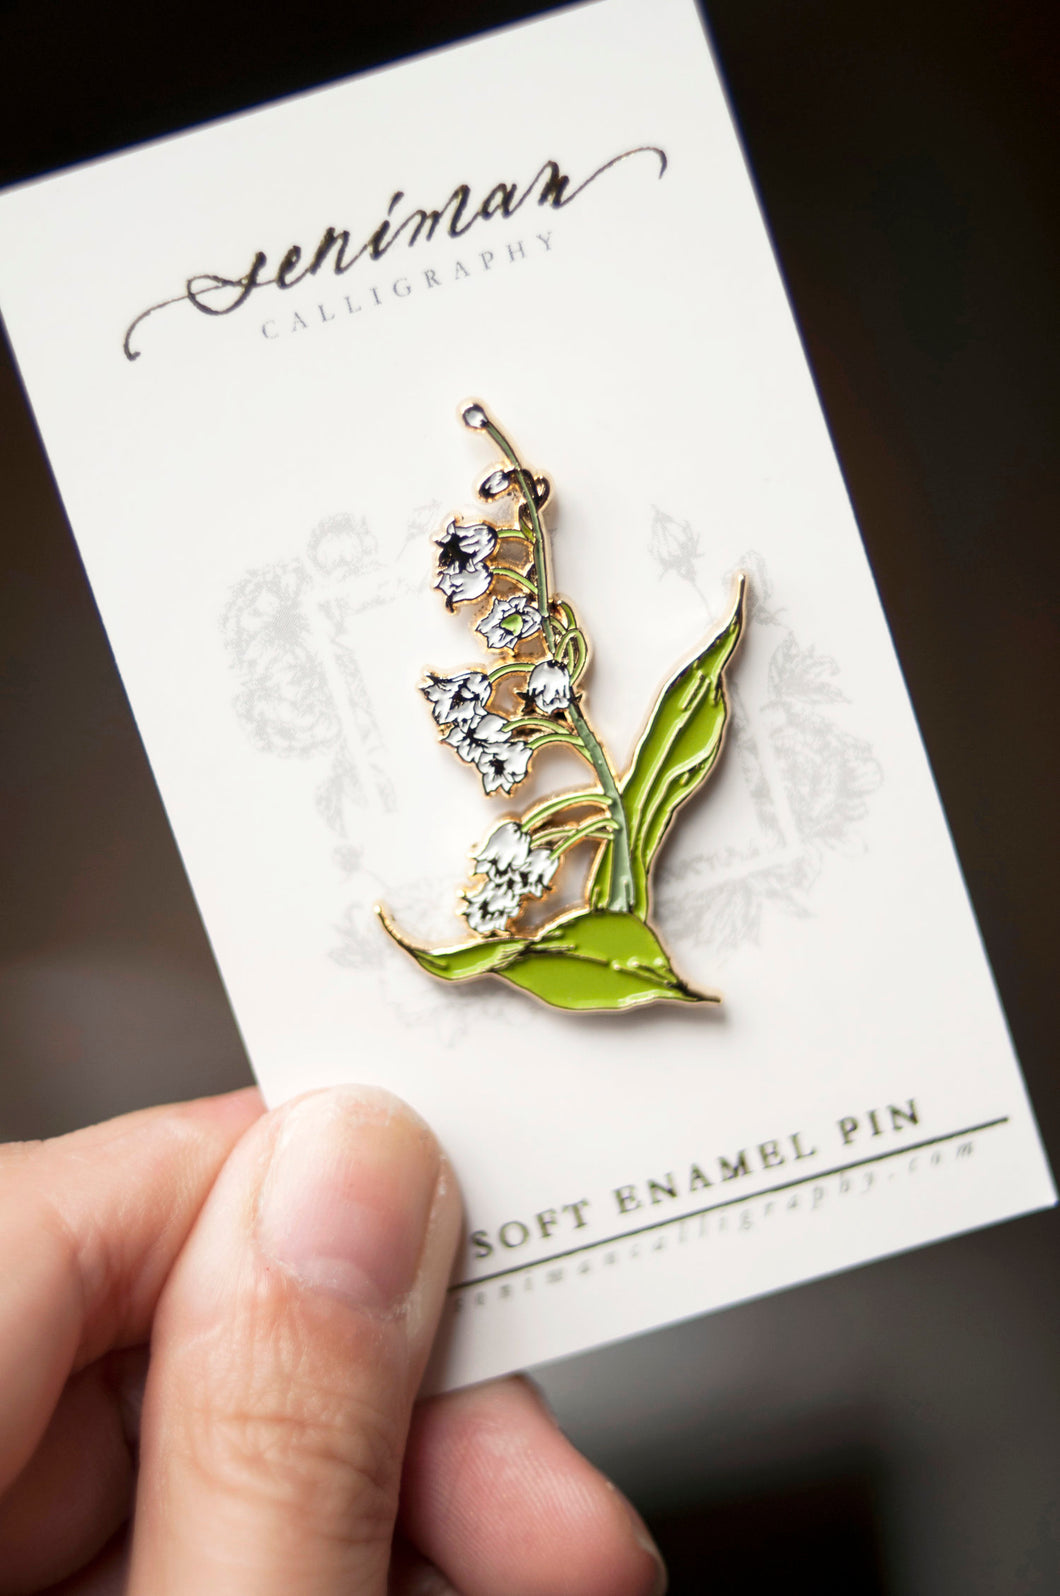 White Lily of the Valley Soft Enamel Pin